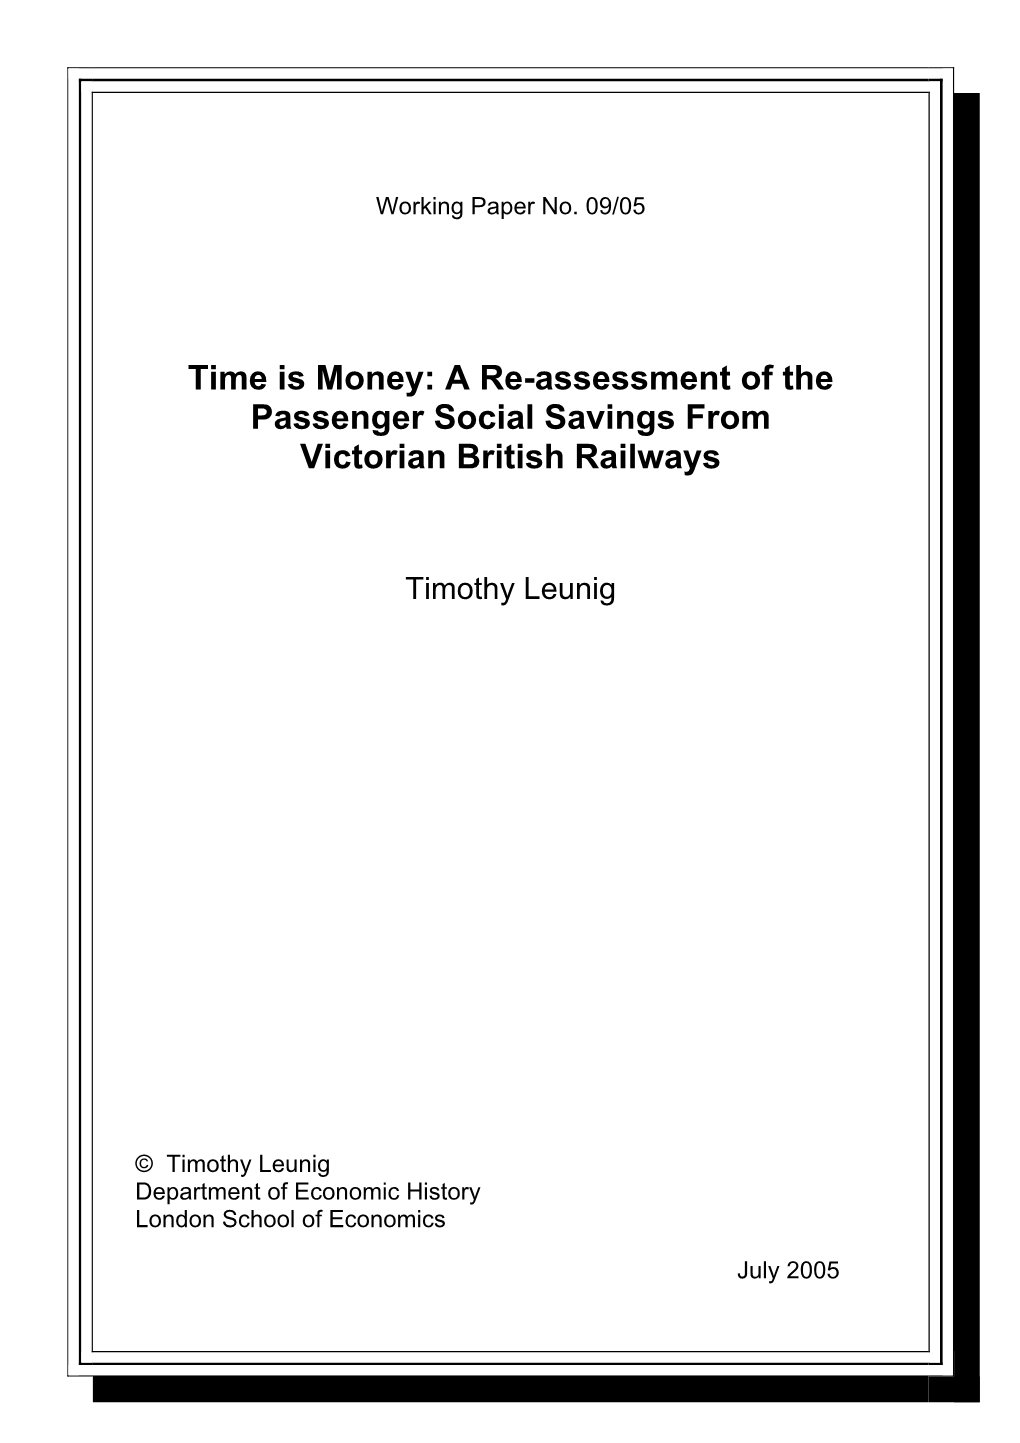 A Re-Assessment of the Passenger Social Savings from Victorian British Railways